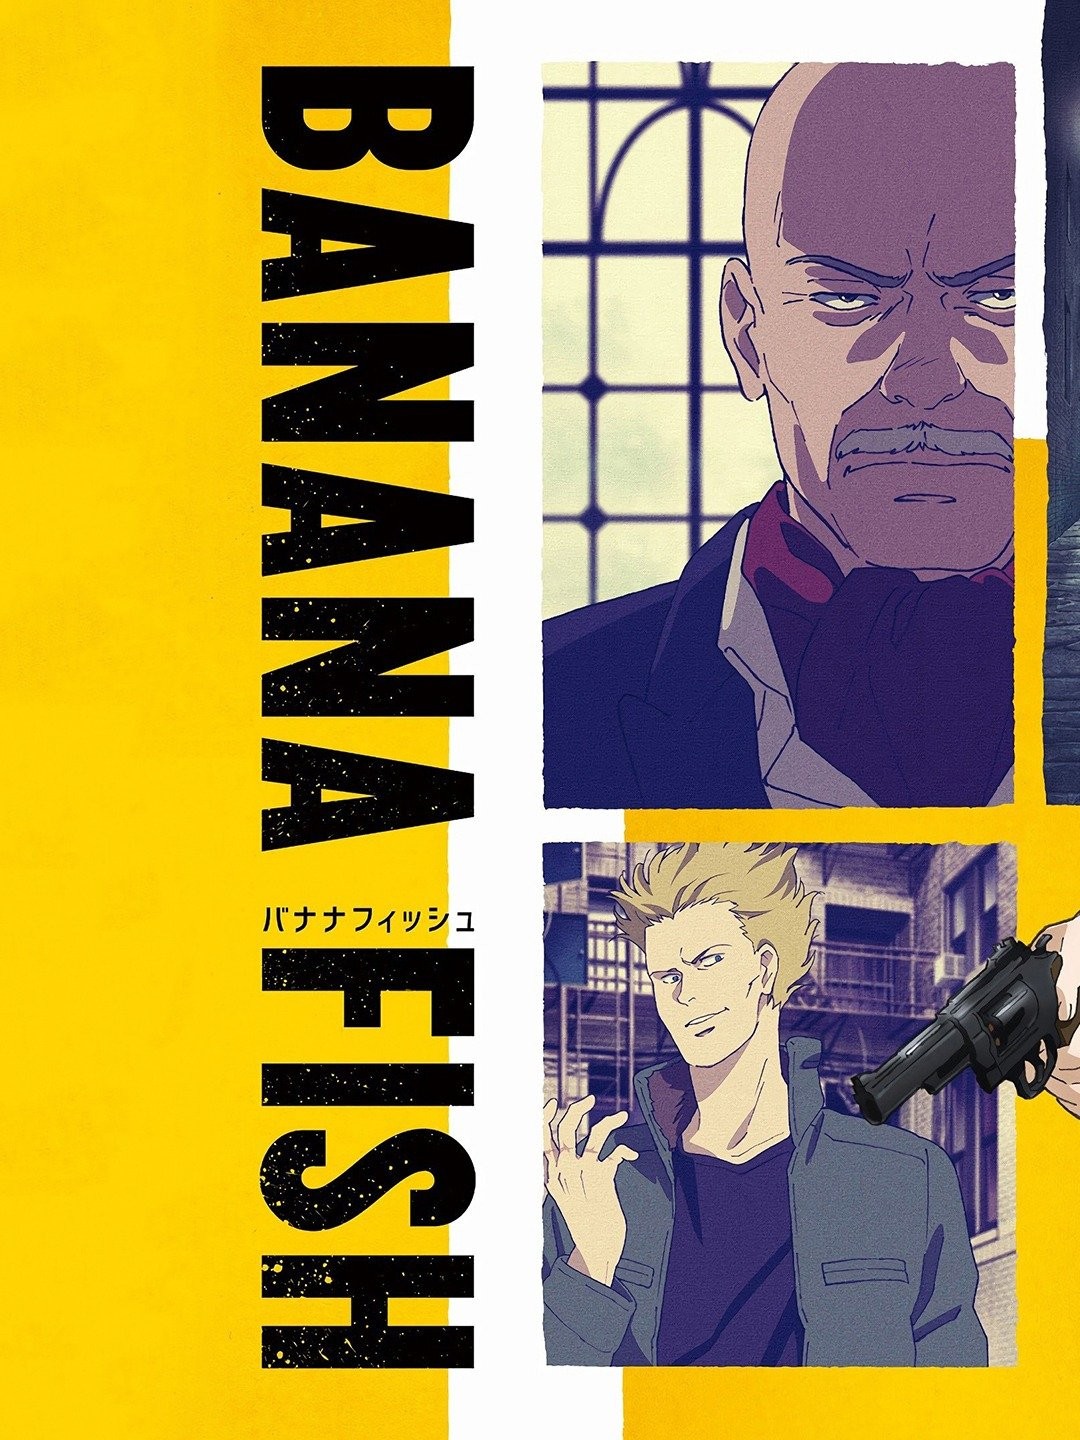 Here's Where You Can Watch Every Episode Of Banana Fish